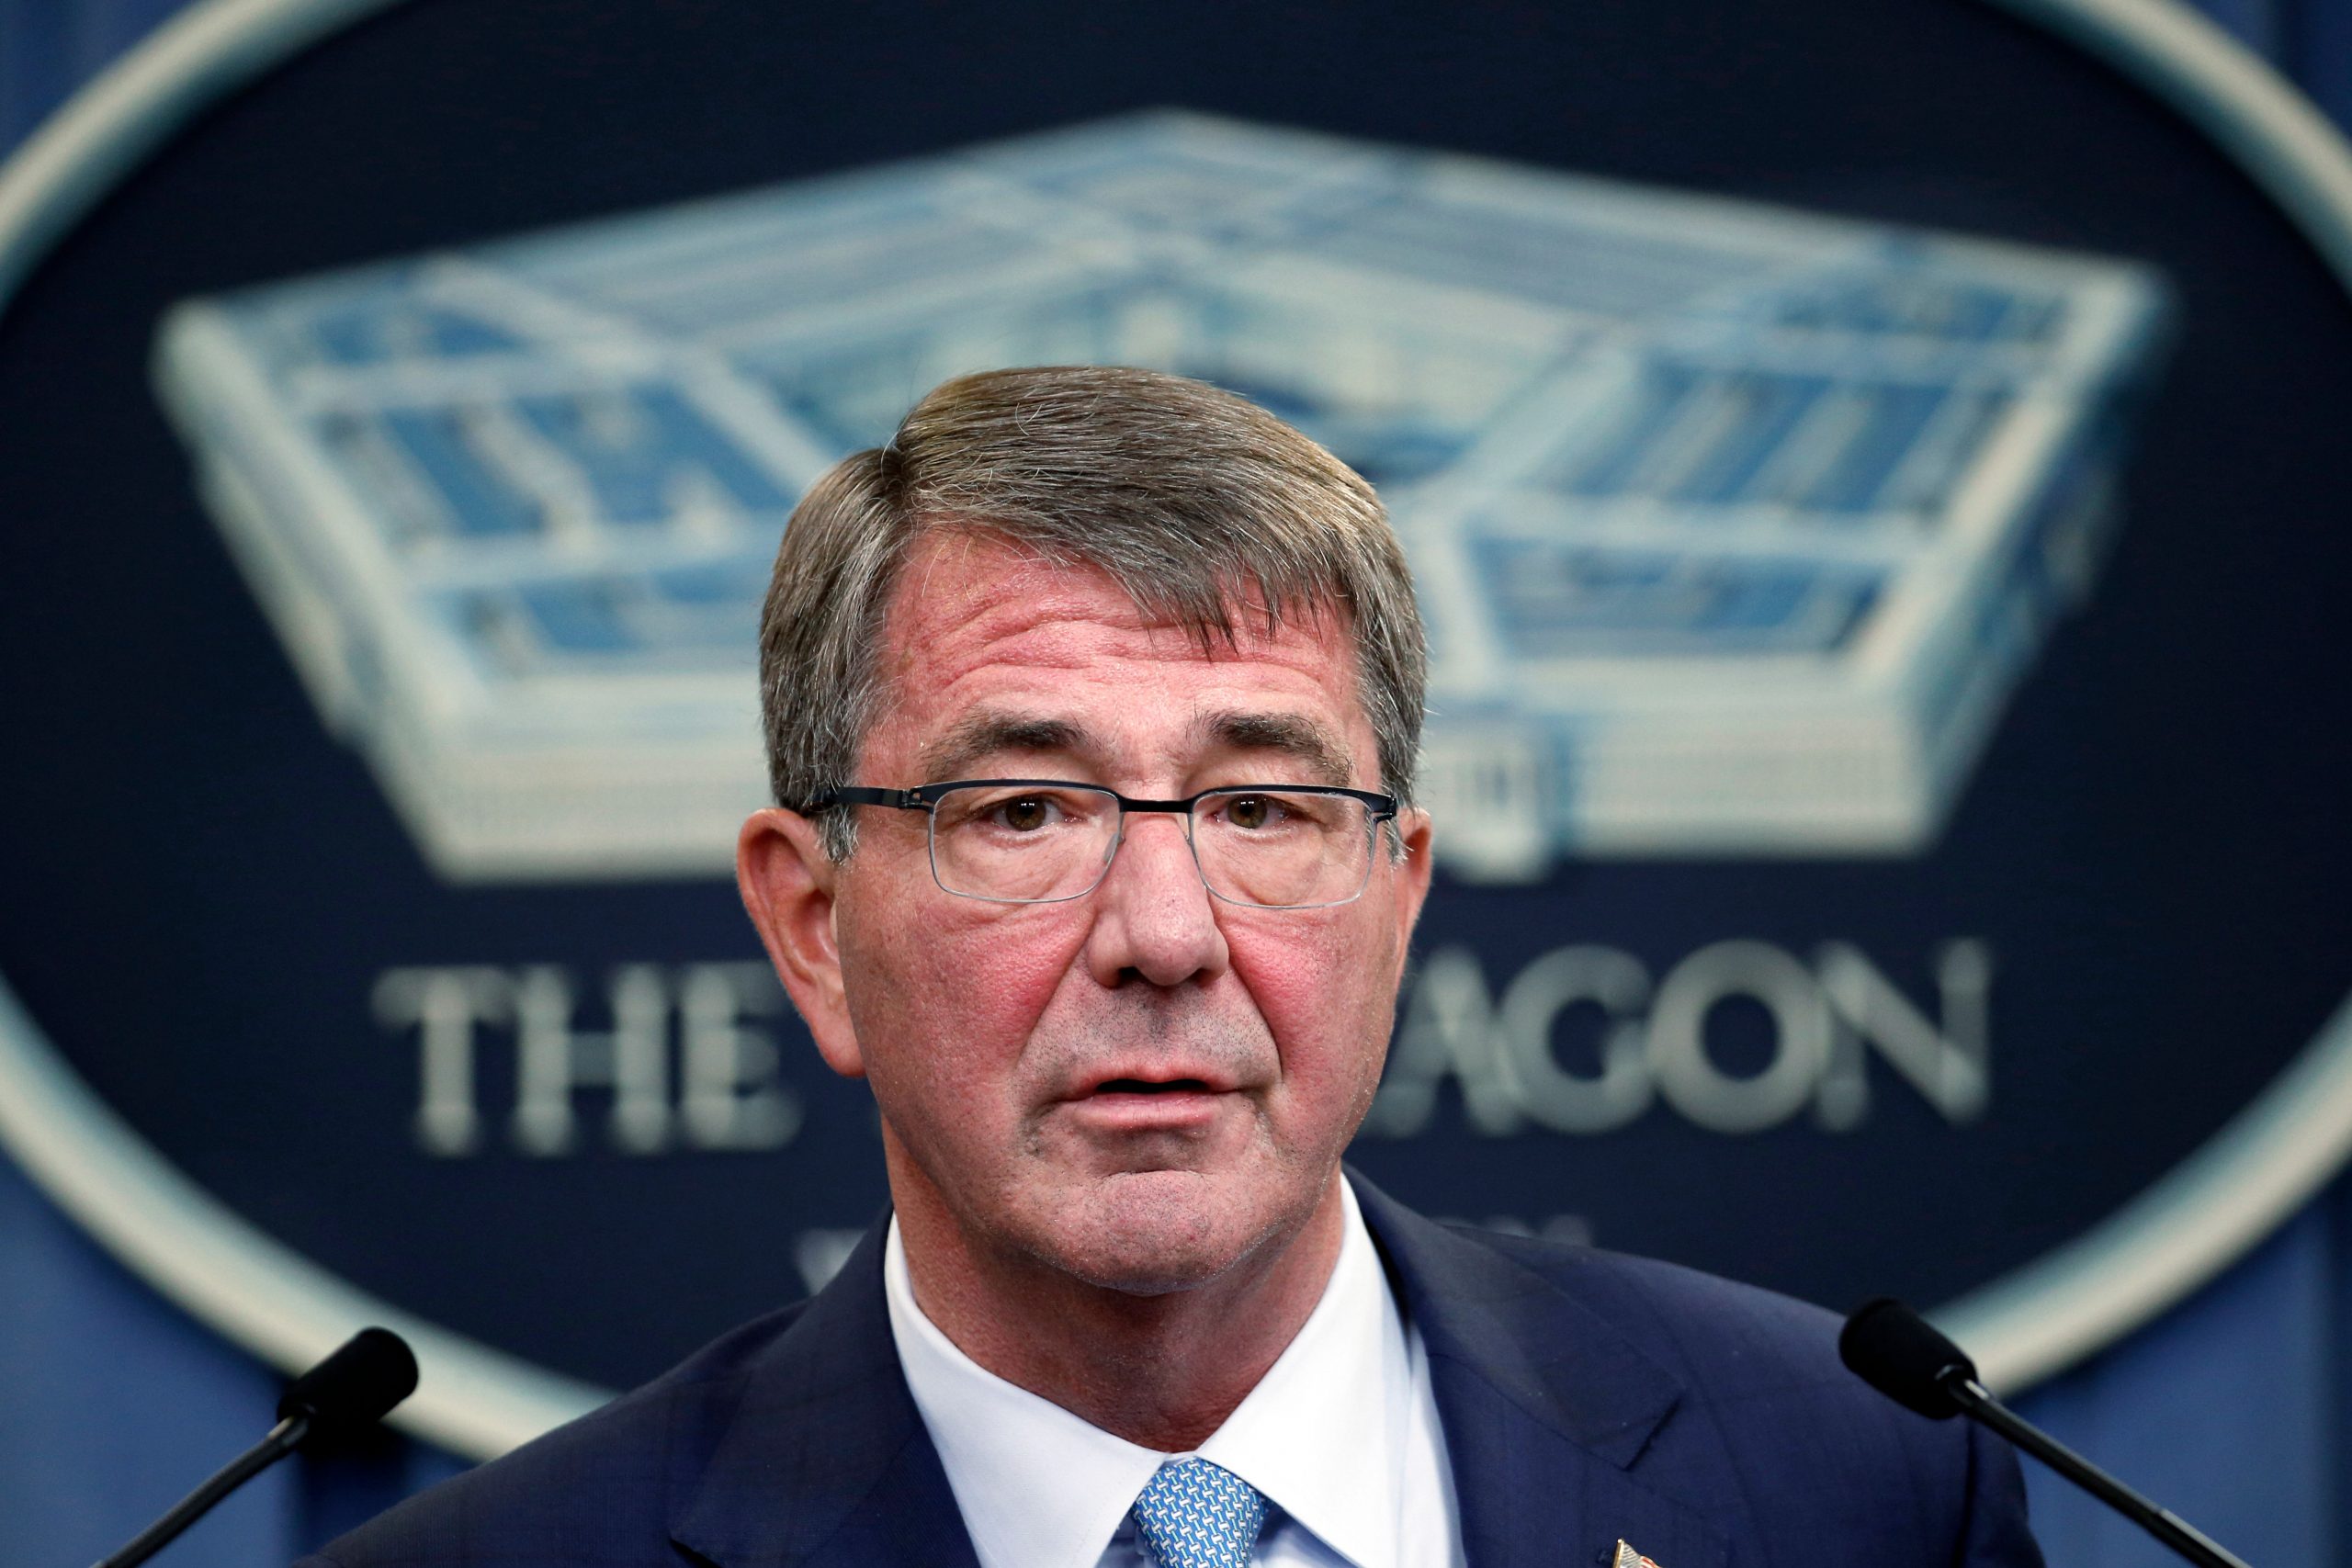 Who was Ash Carter?